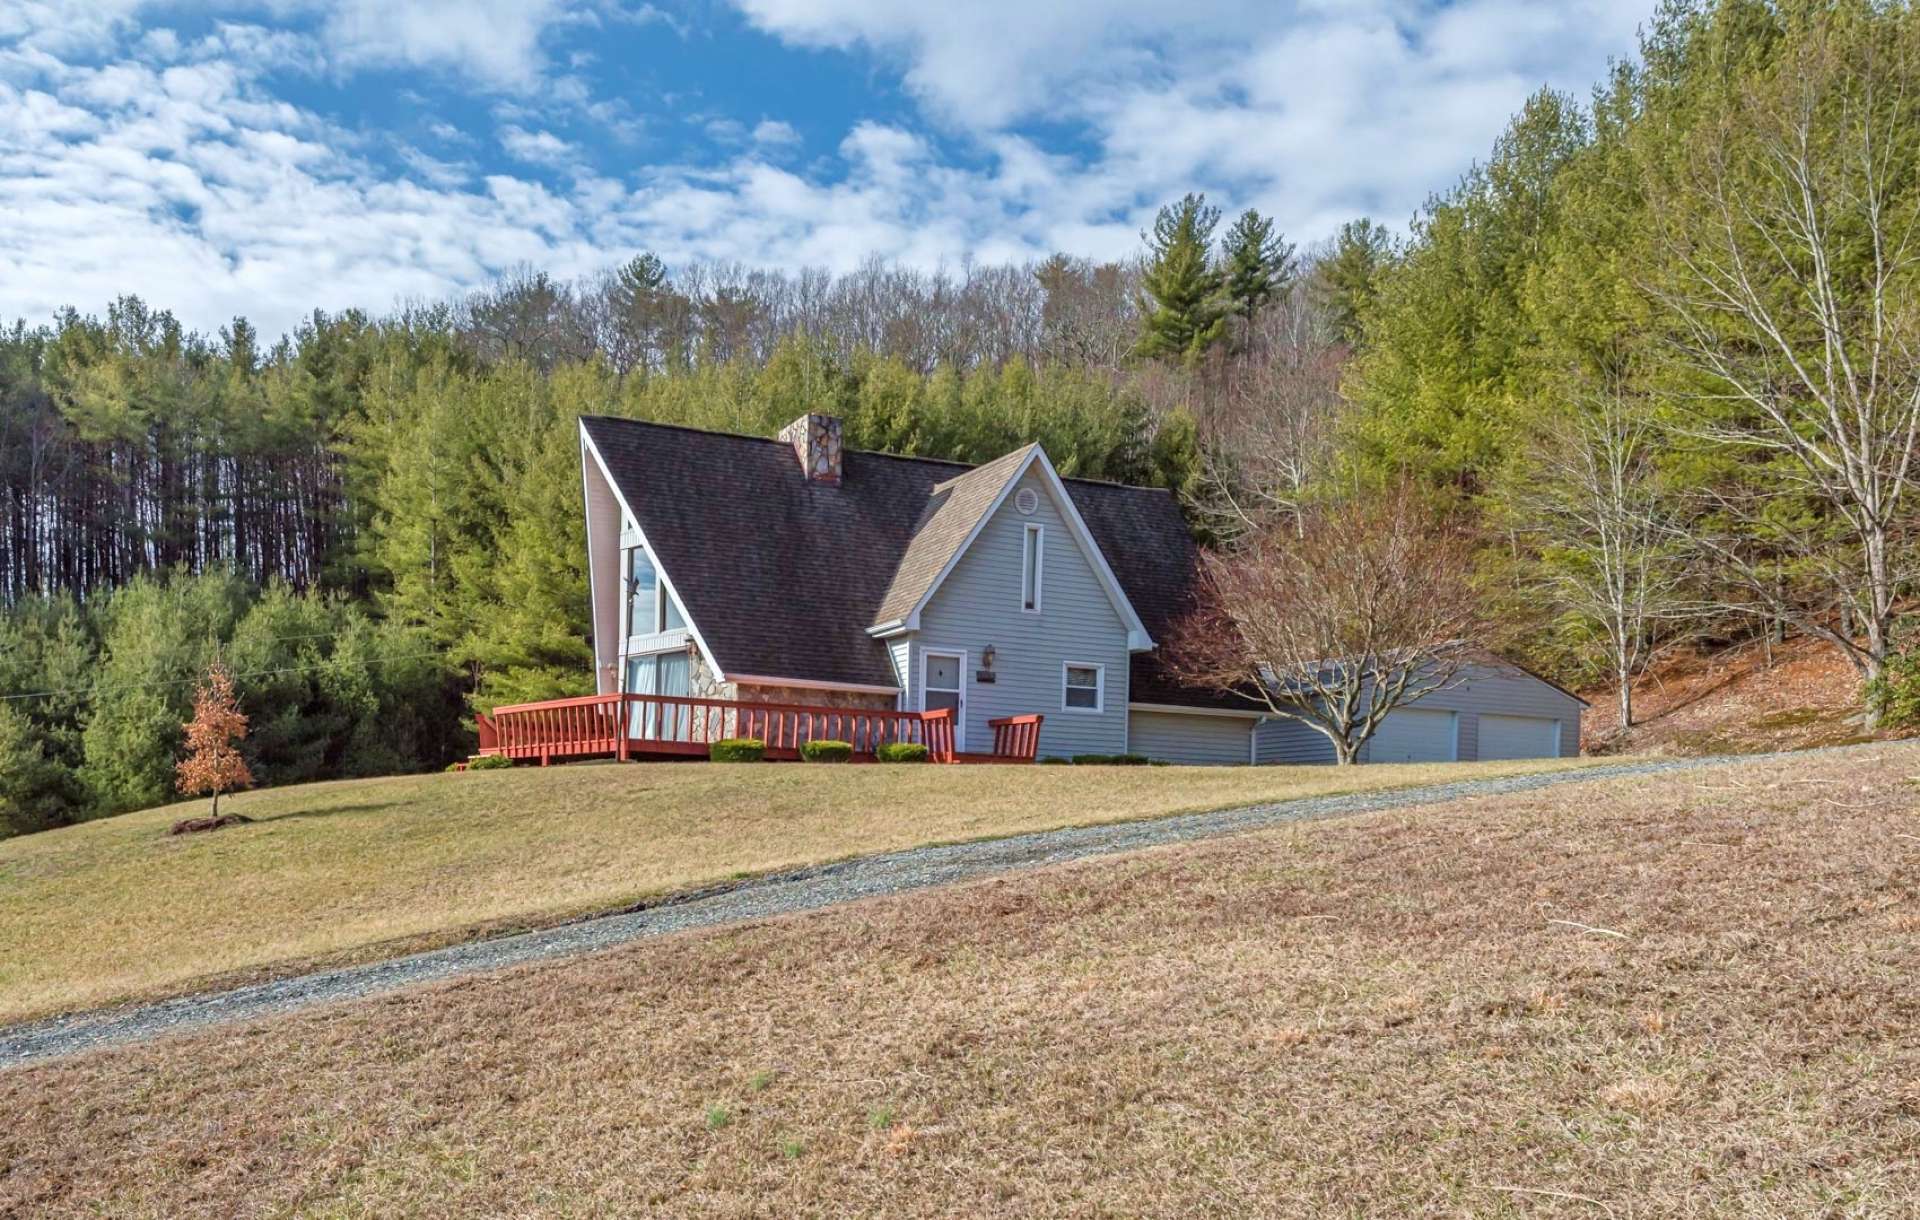 Offered at only $300,000, this mountain chalet with 5+ acres and convenient Southern Ashe County location is ideal for your High Country retreat or primary residence. Call today for additional information or an appointment to view listing B165.